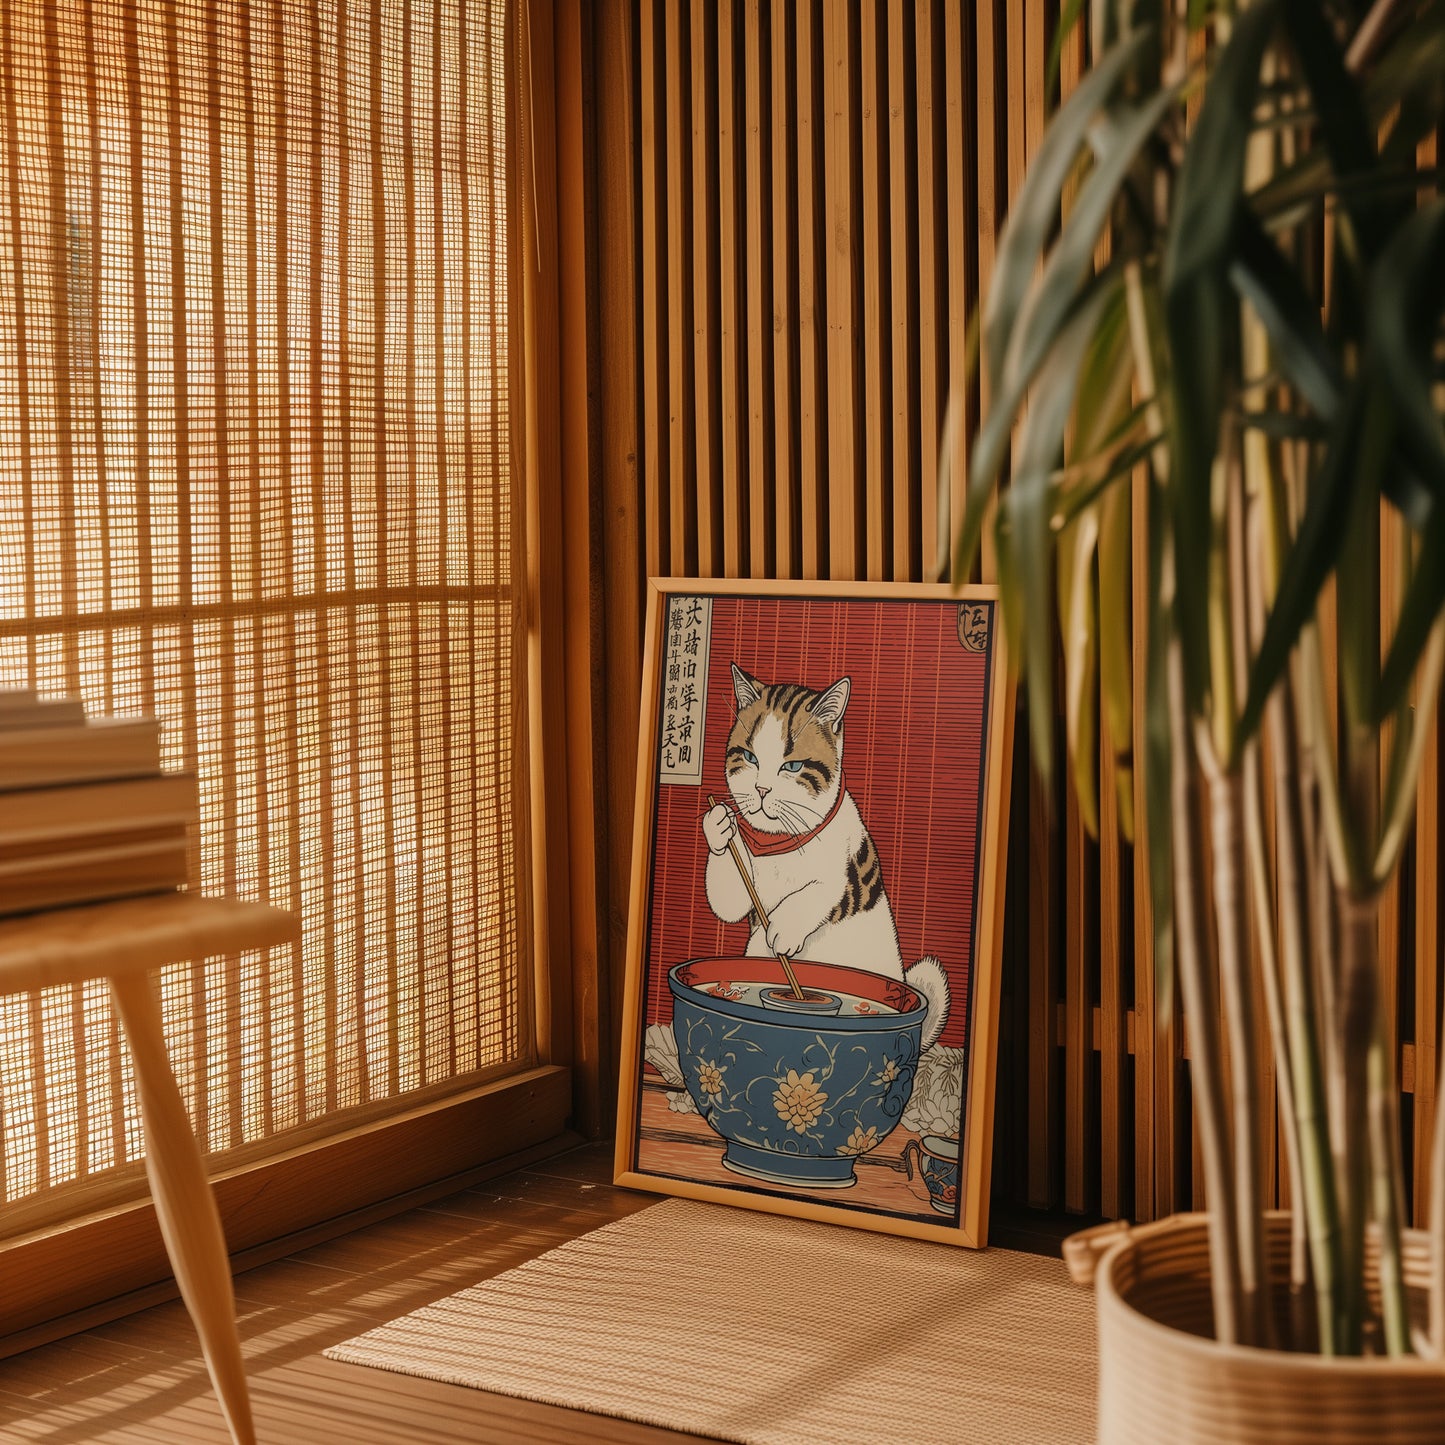 A traditional Japanese illustration of a cat, placed beside a plant in a warm, sunlit room with bamboo blinds.